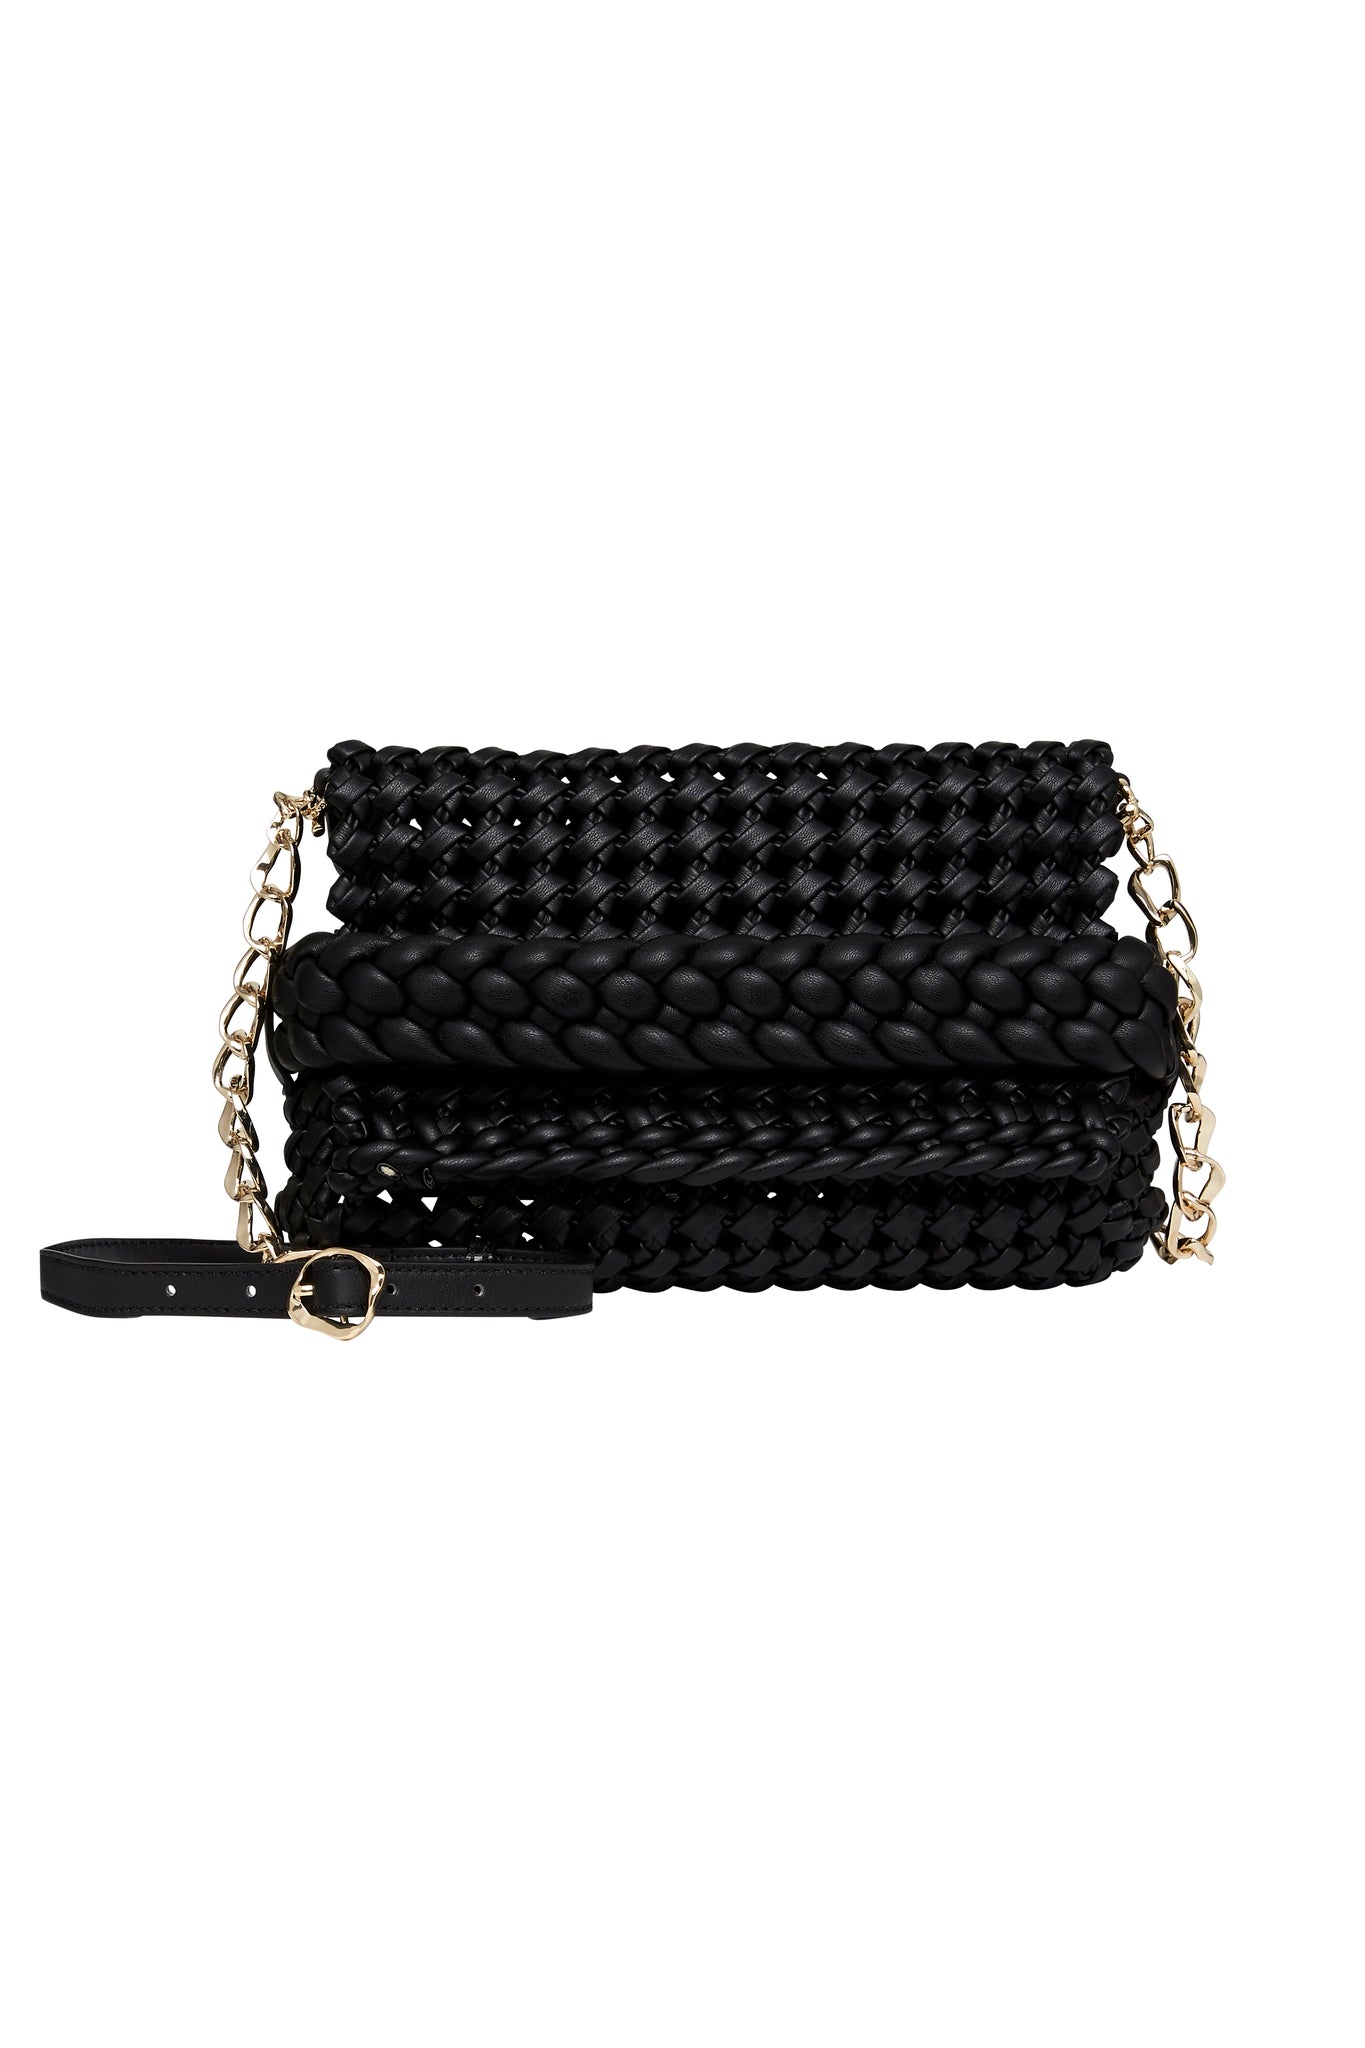 Clutch With Chain Patent Black / White